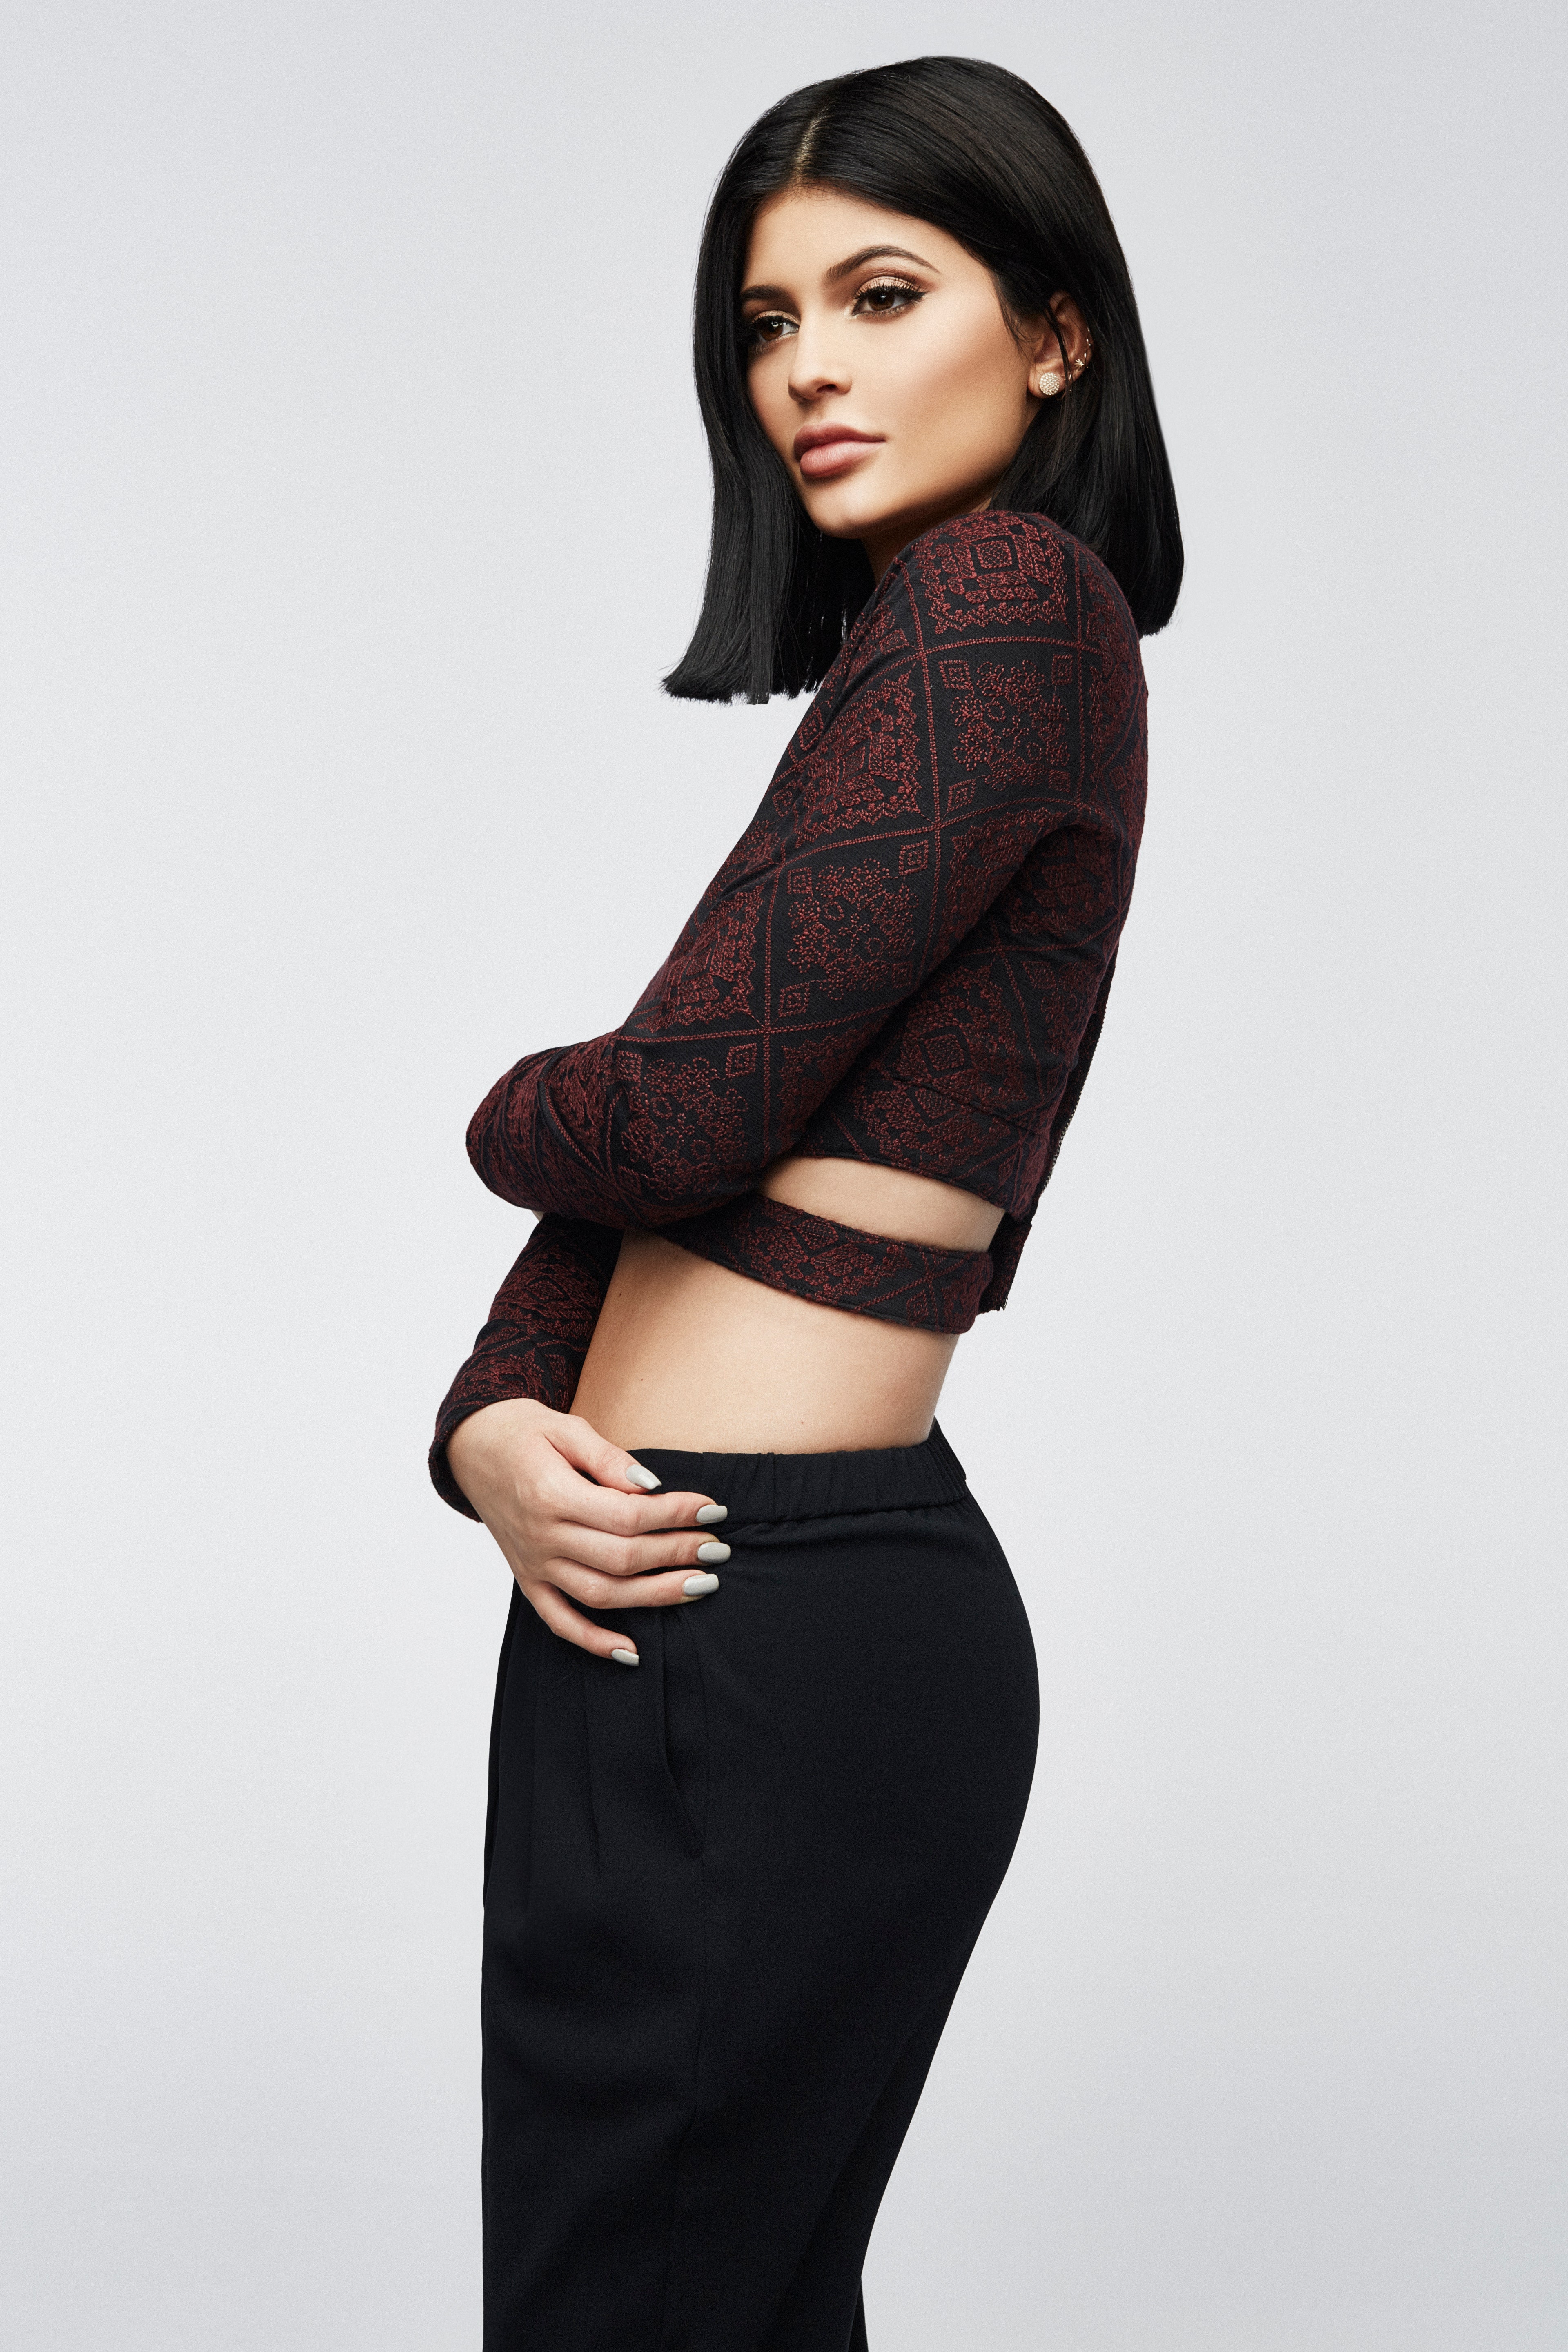 Kendall Jenner PacSun Holiday Collection Wallpapers